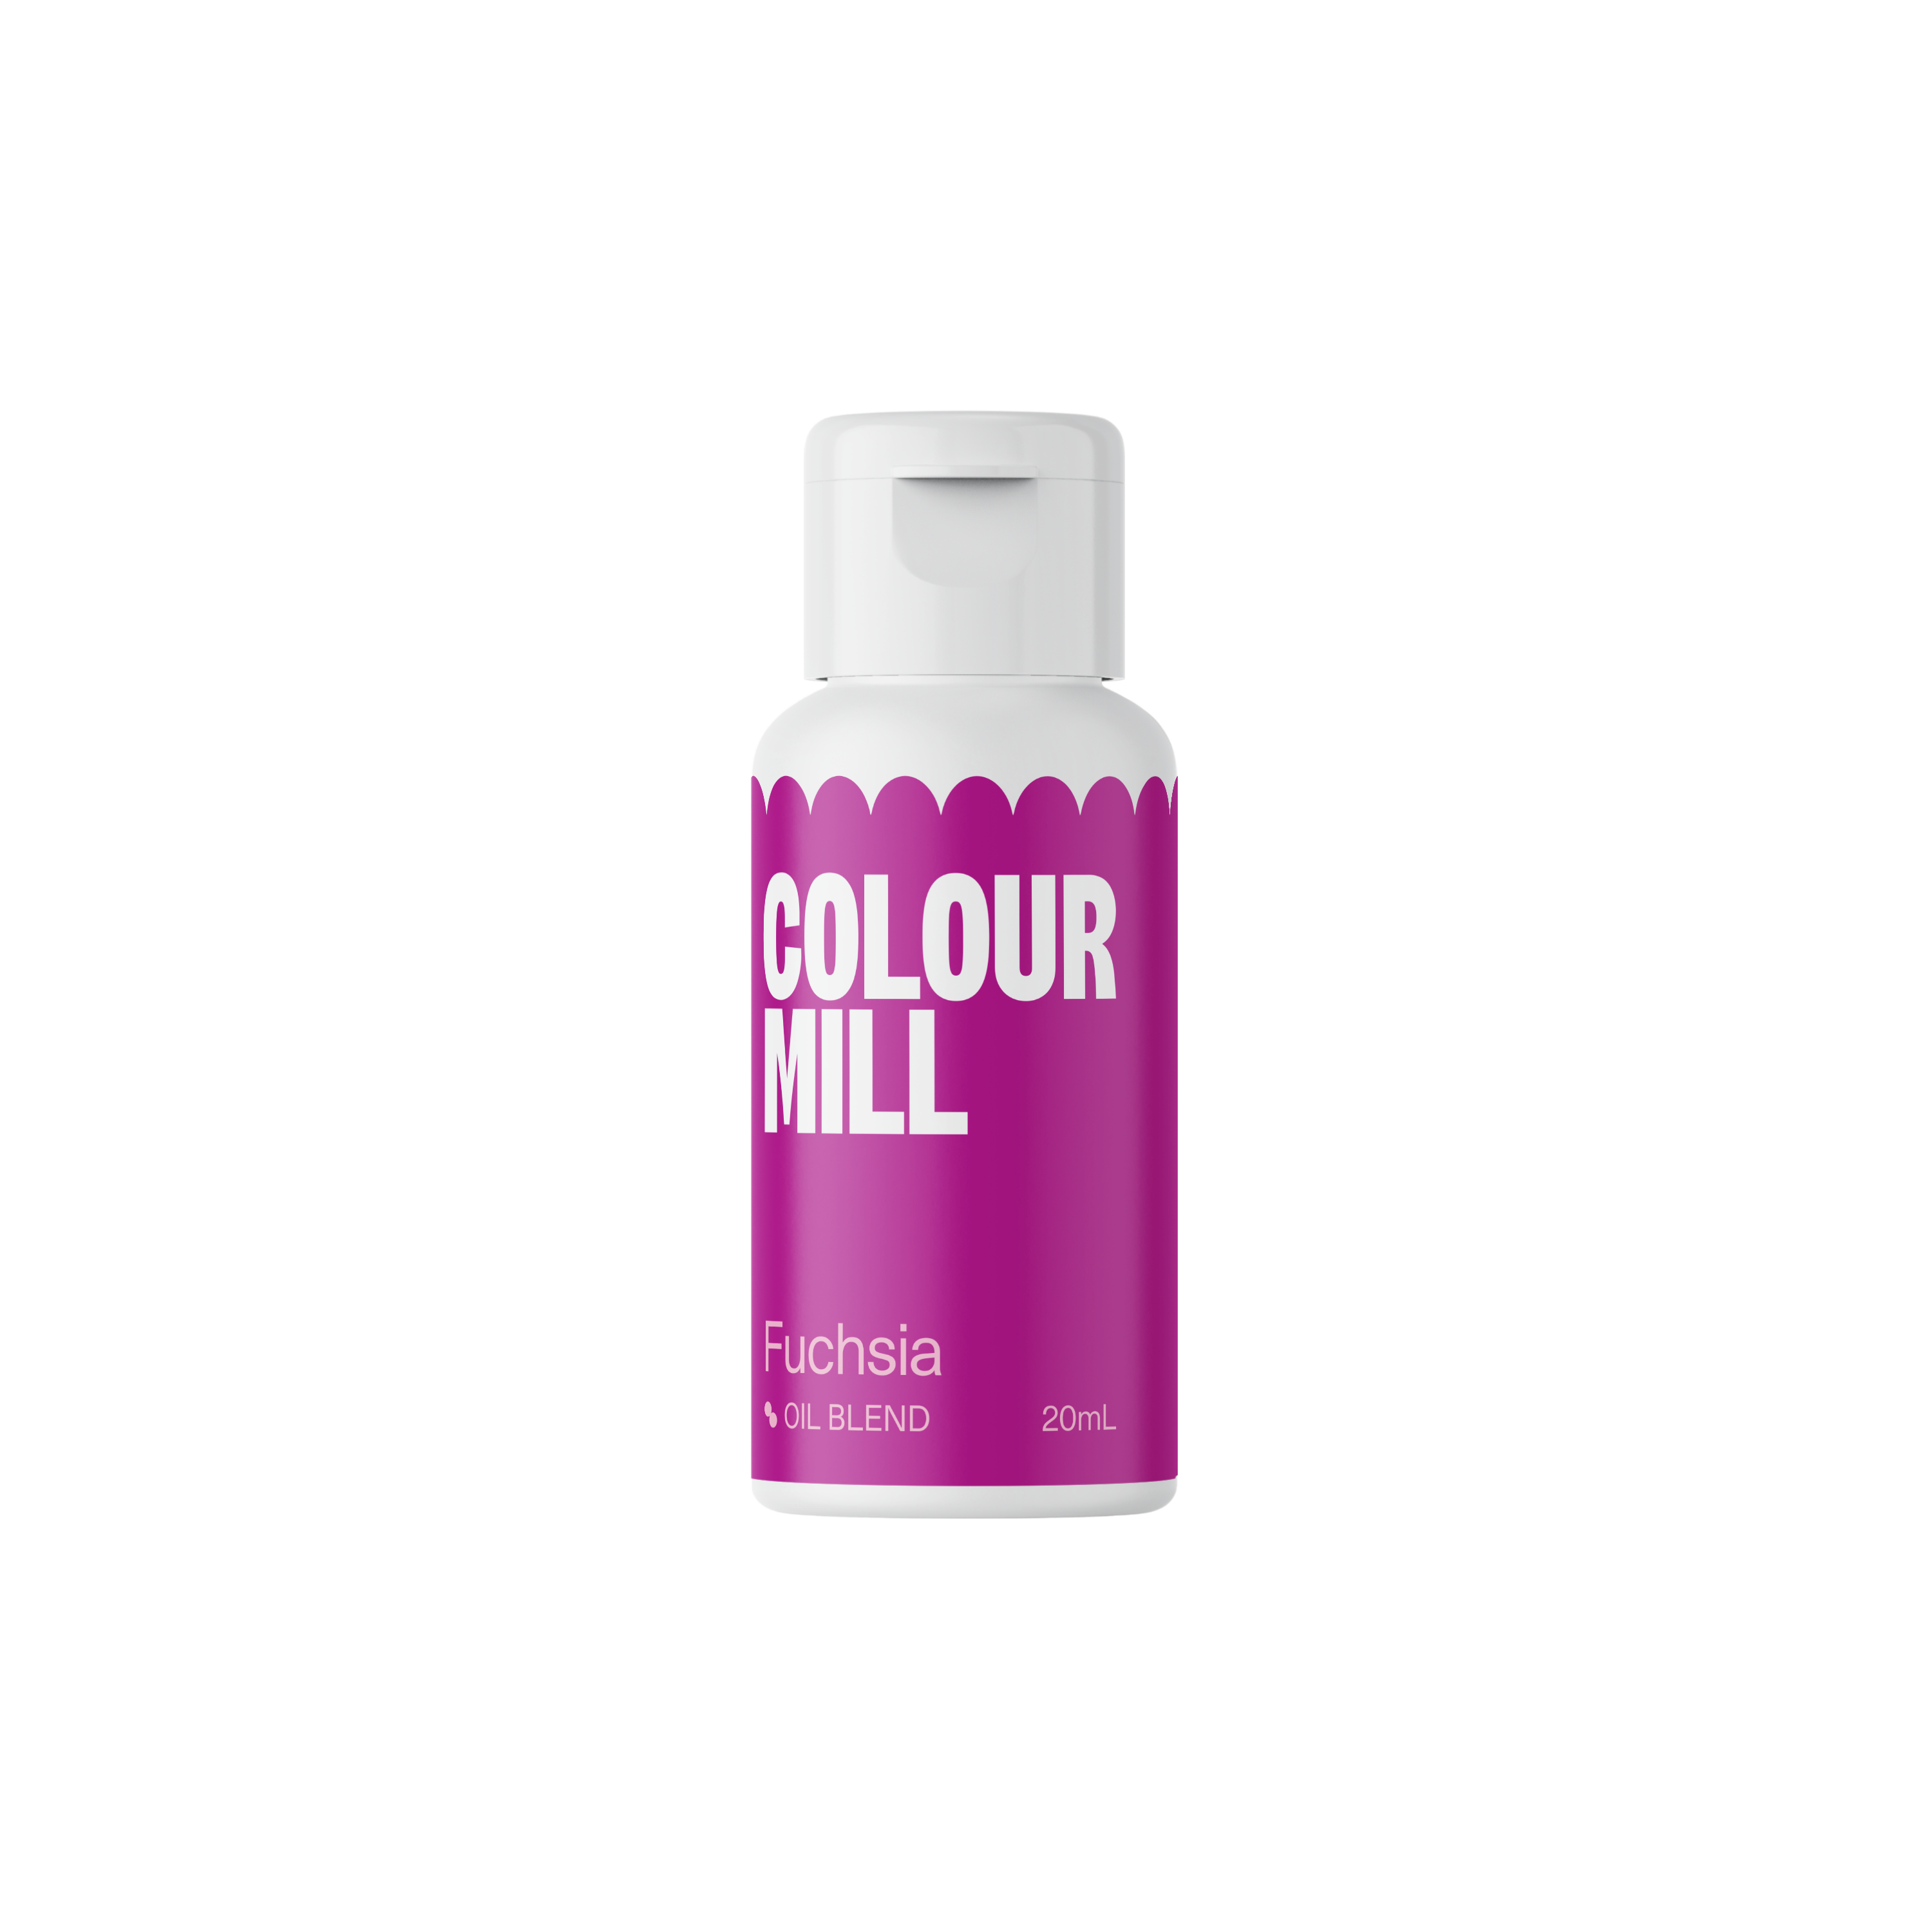 Fuchsia - Oil Blendproduct image